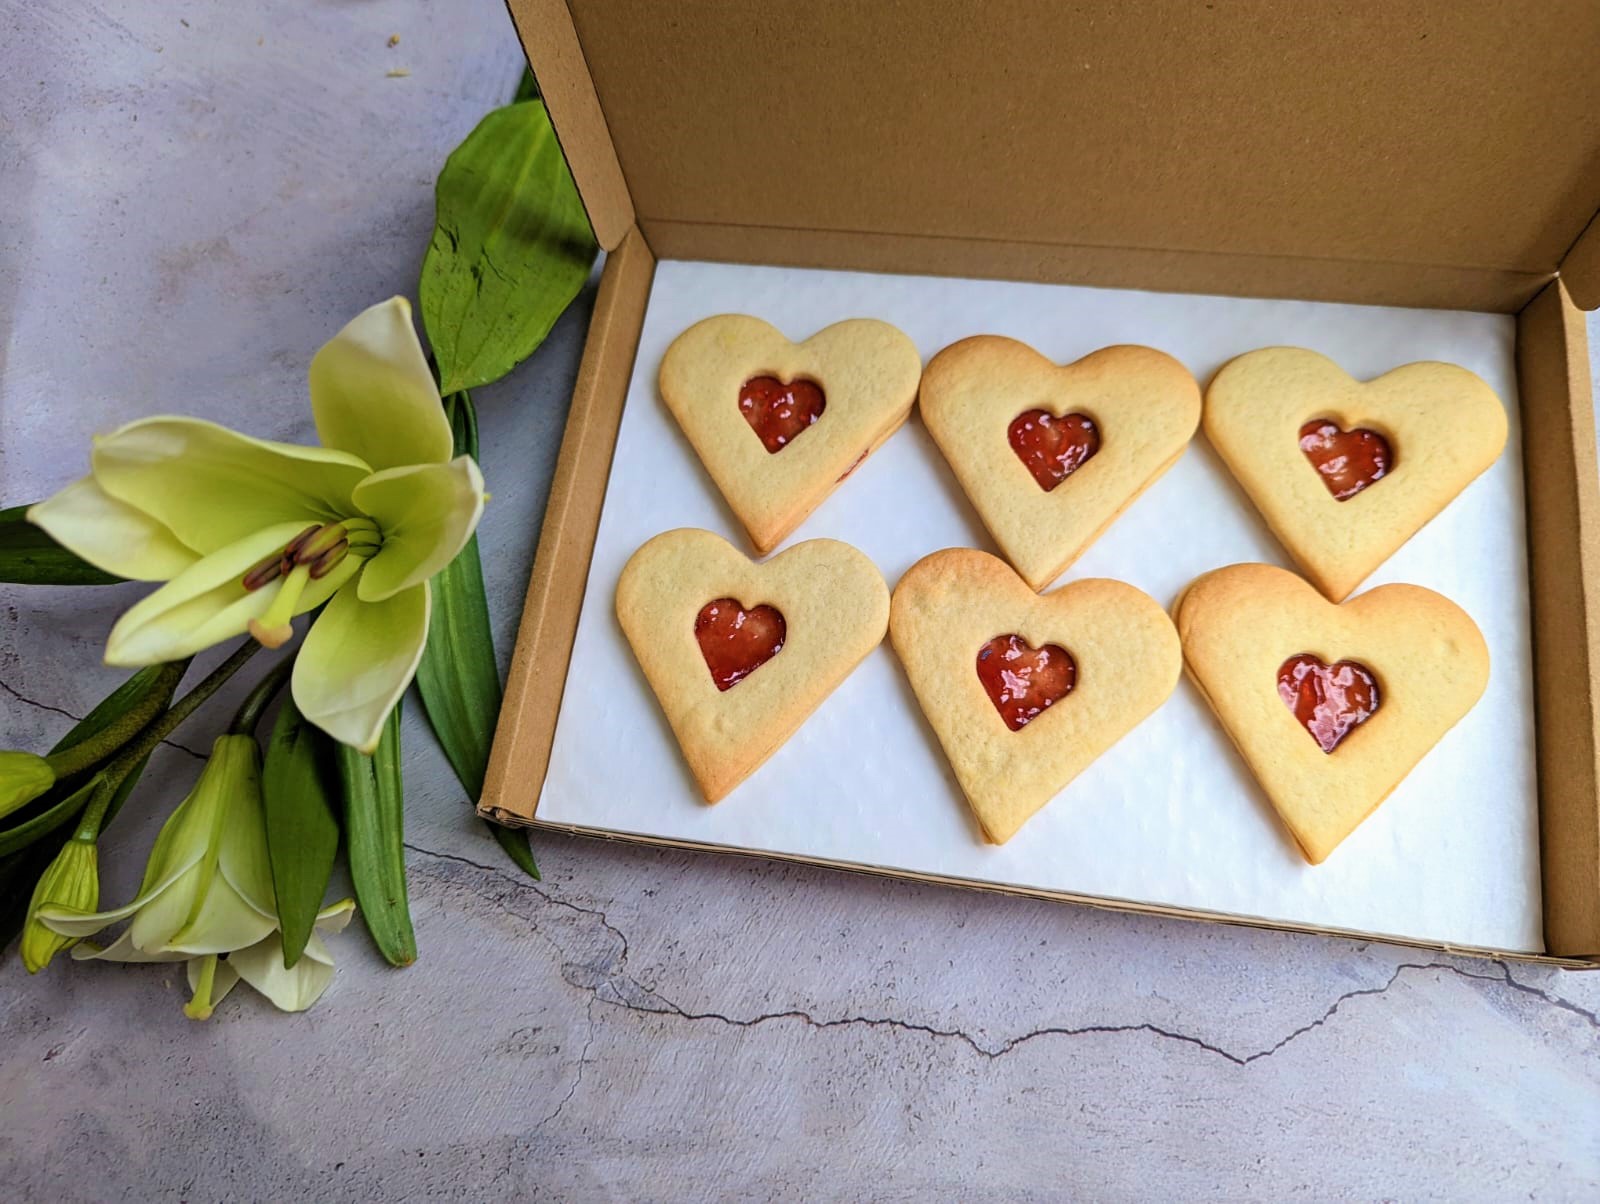 Heart shaped jam sandwich biscuits for Valentine's Day